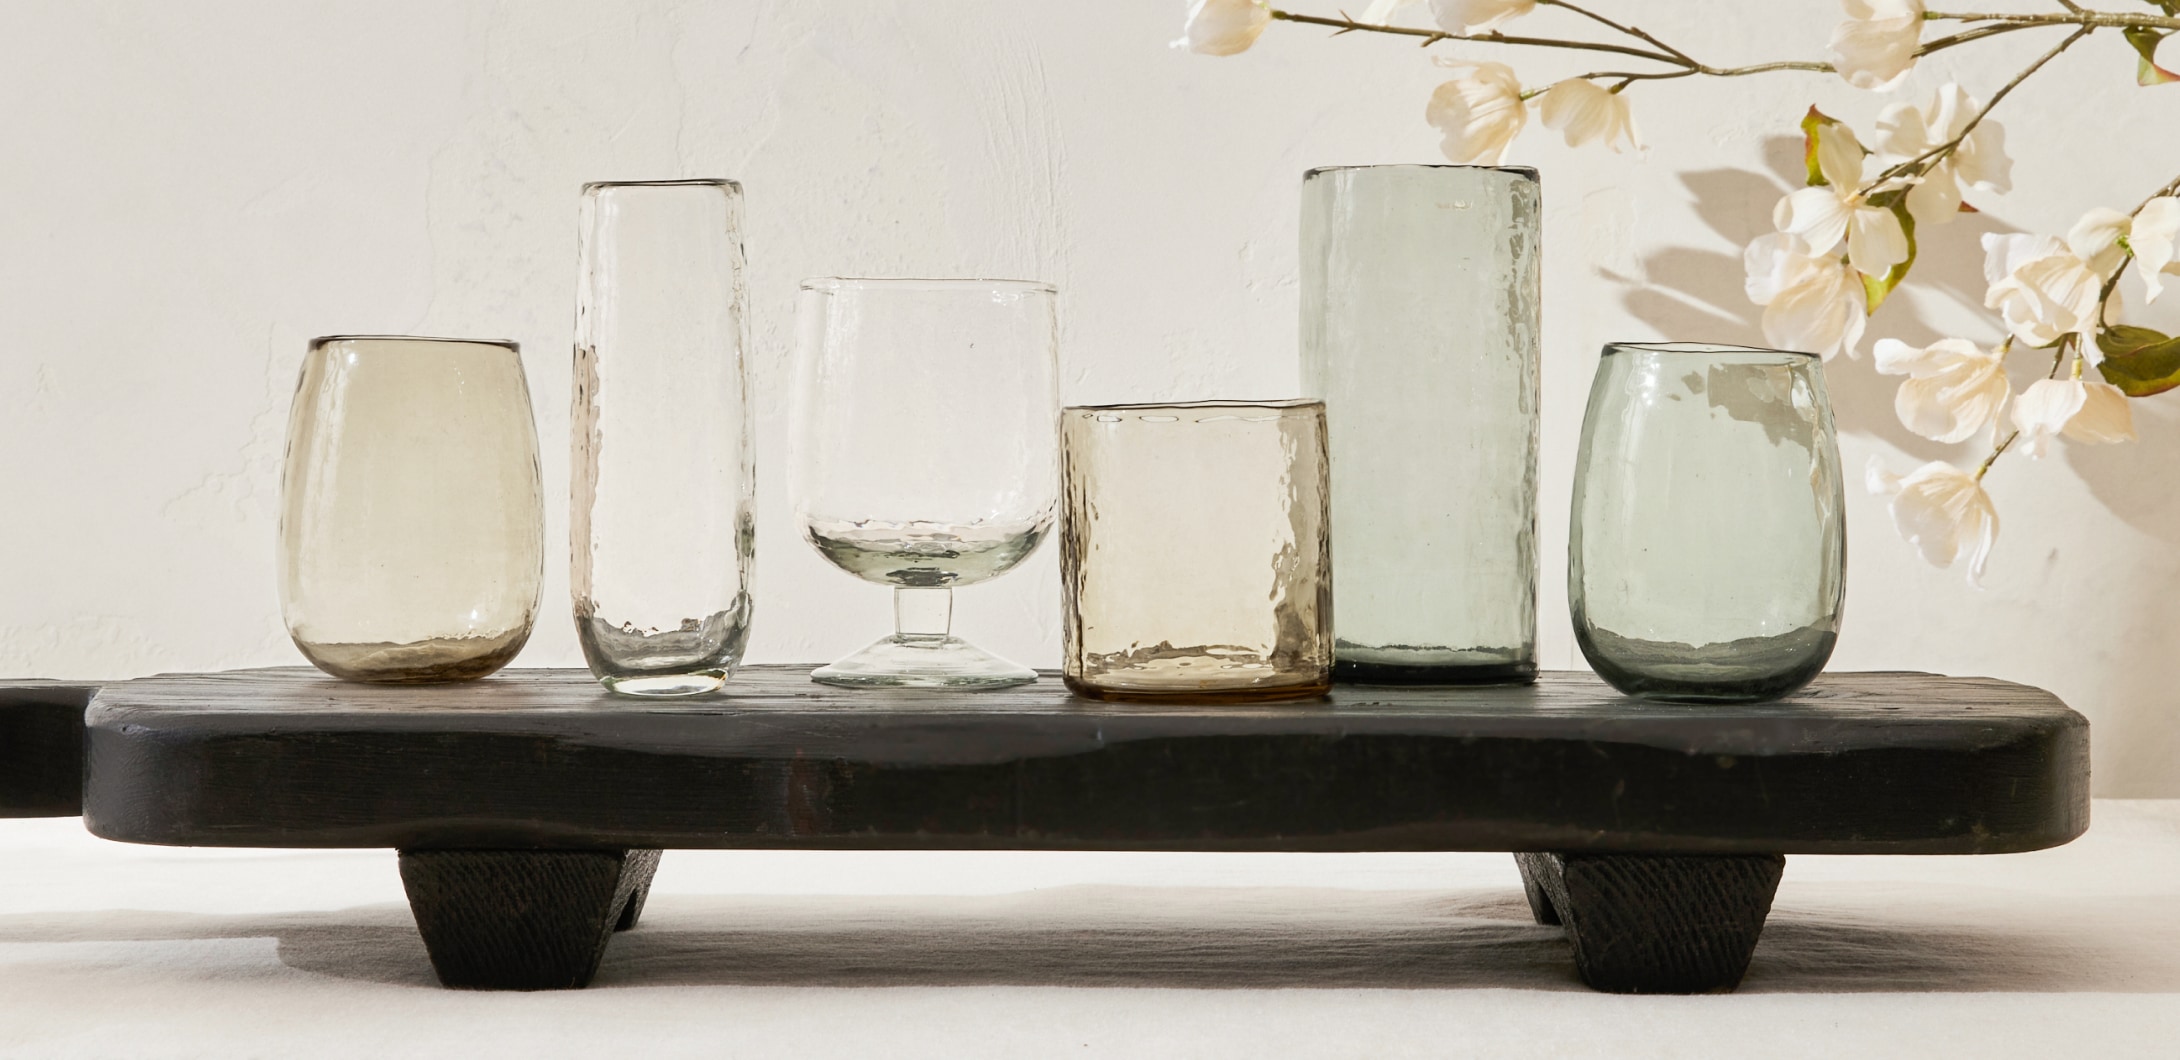 Glassware Collections - SP24, Pottery Barn, Glassware Collections - SP24